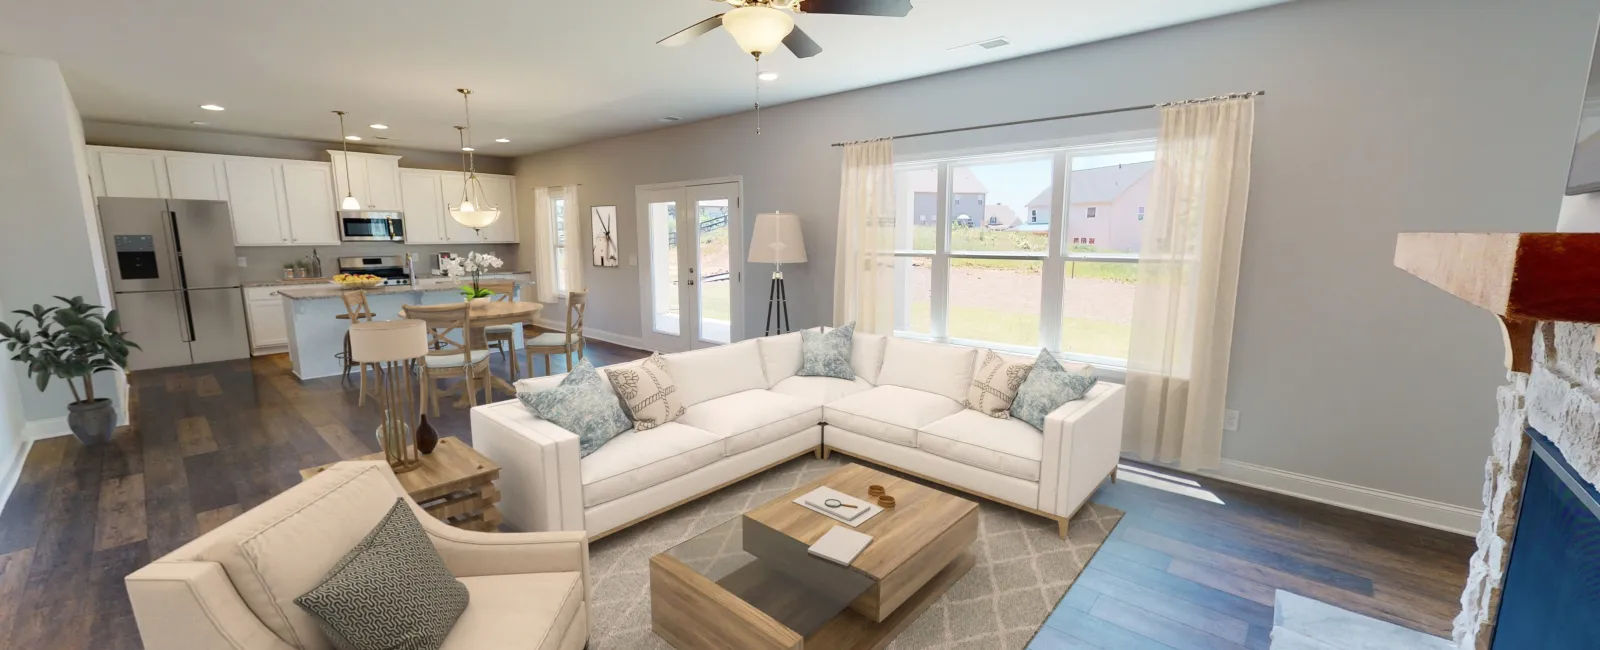 New Homes Available at The Georgian in Paulding County